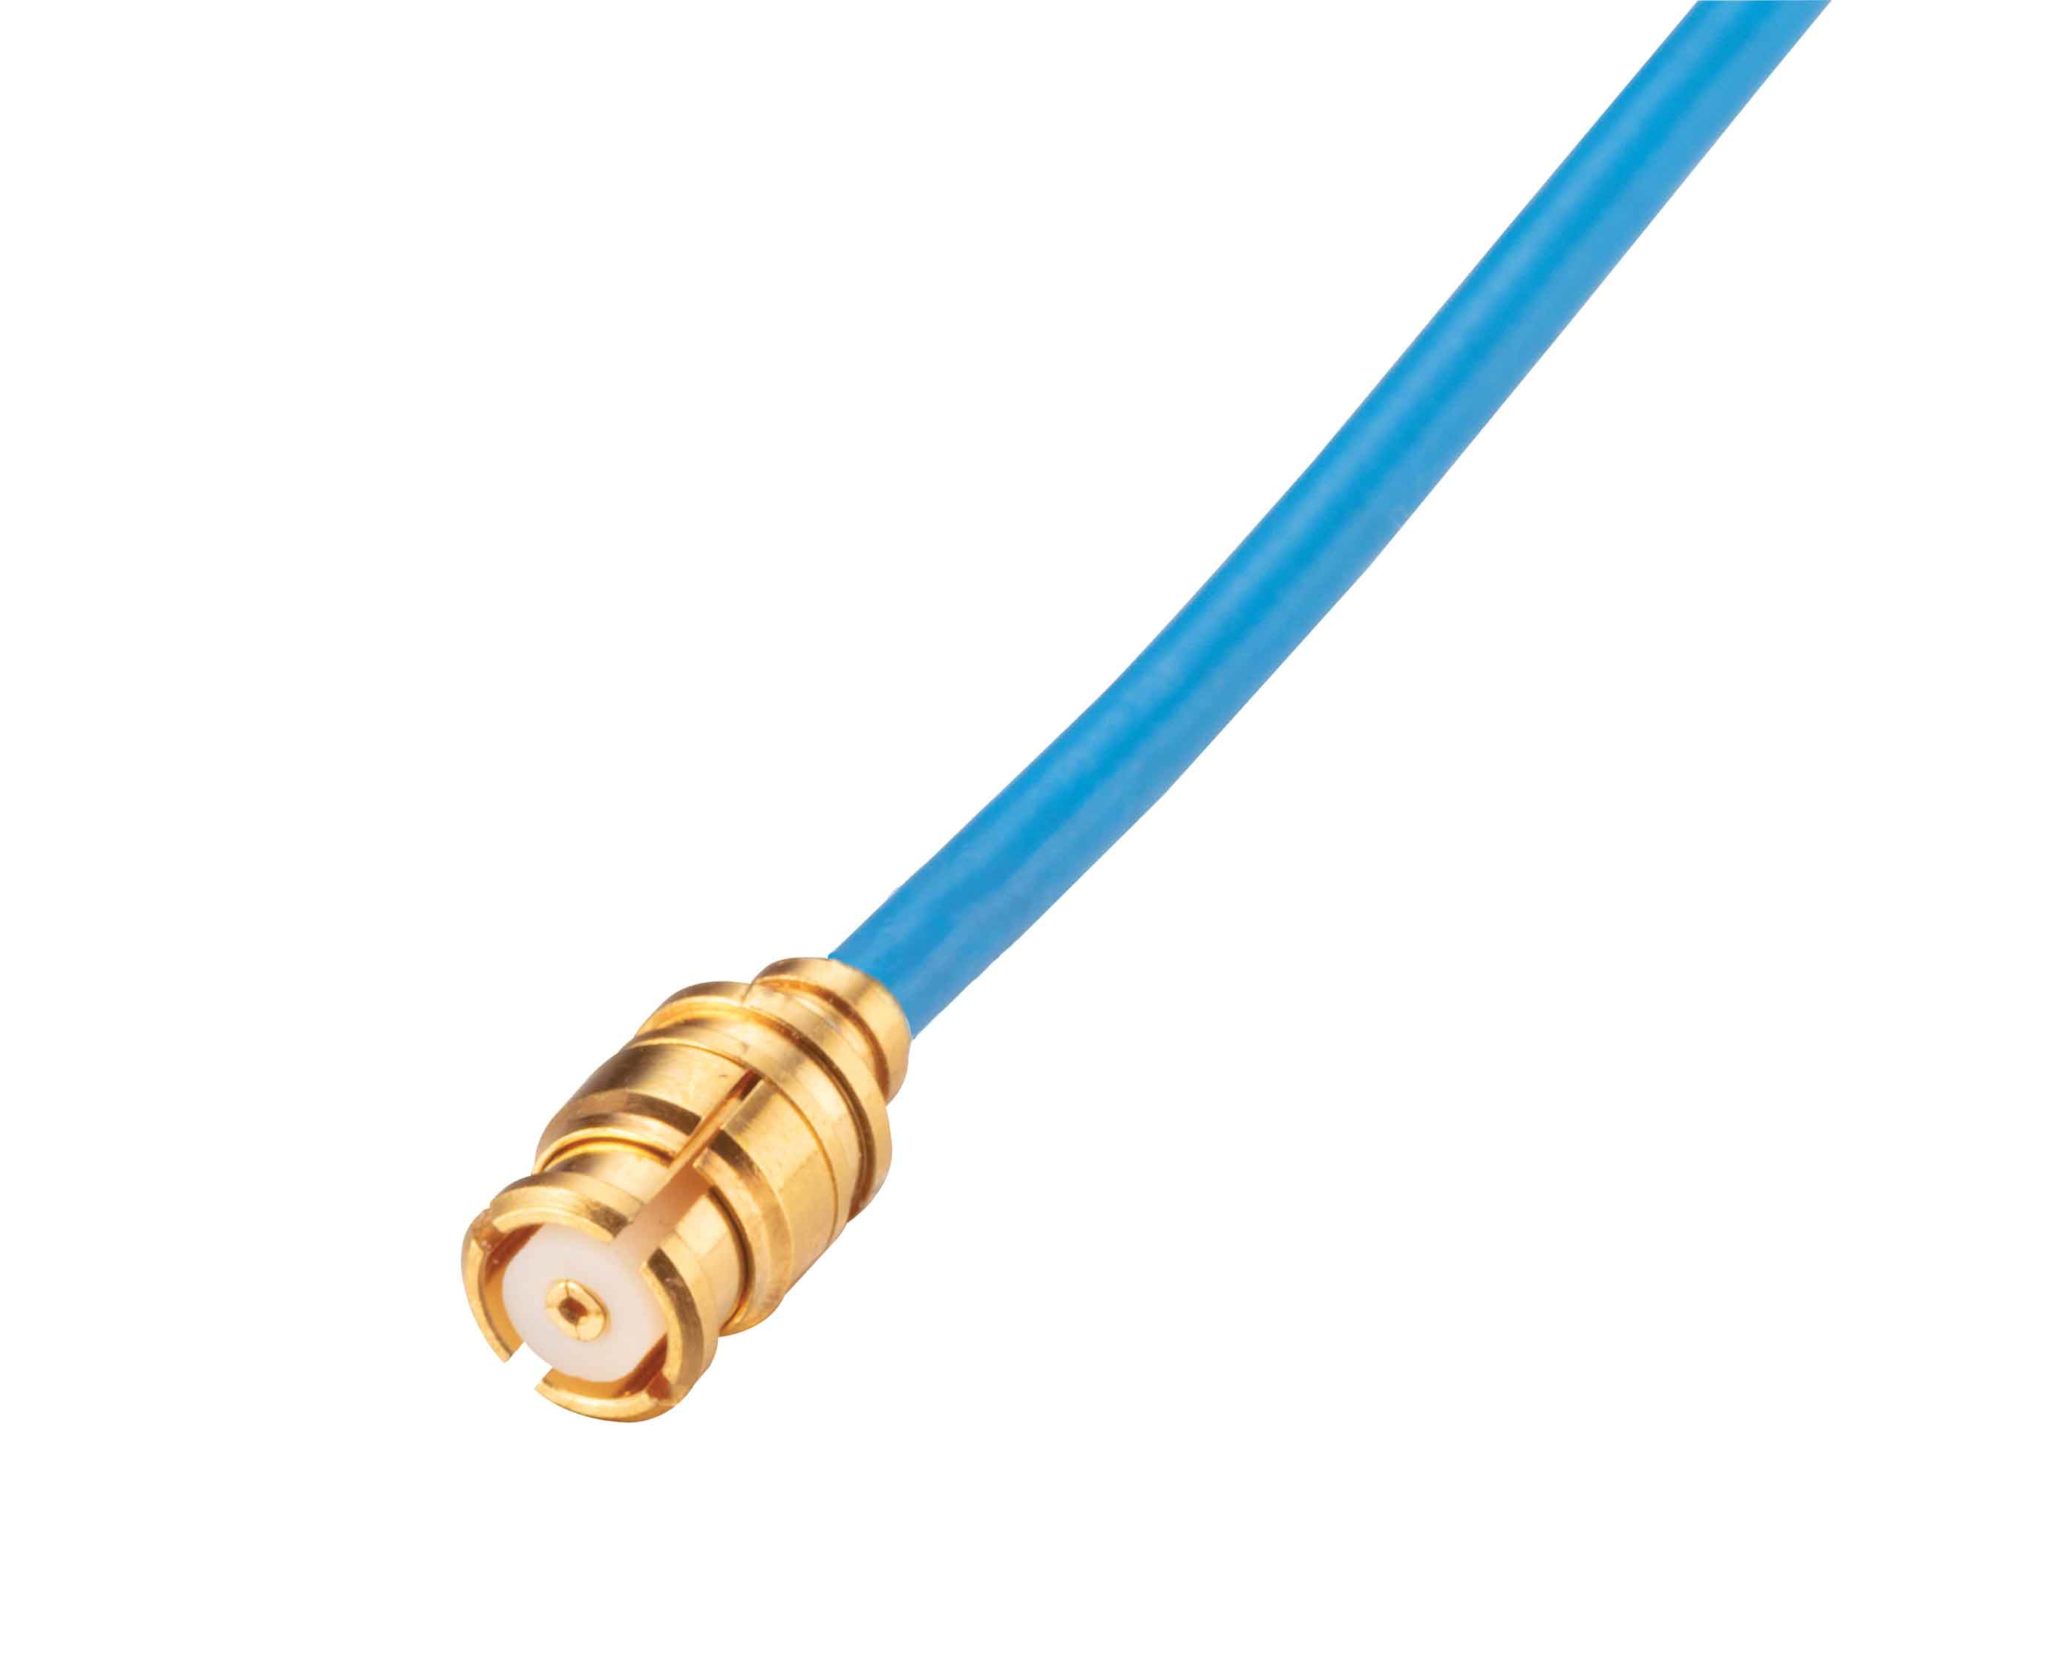 Times Microwave Systems Announces TF-047 Micro-Coaxial Cable